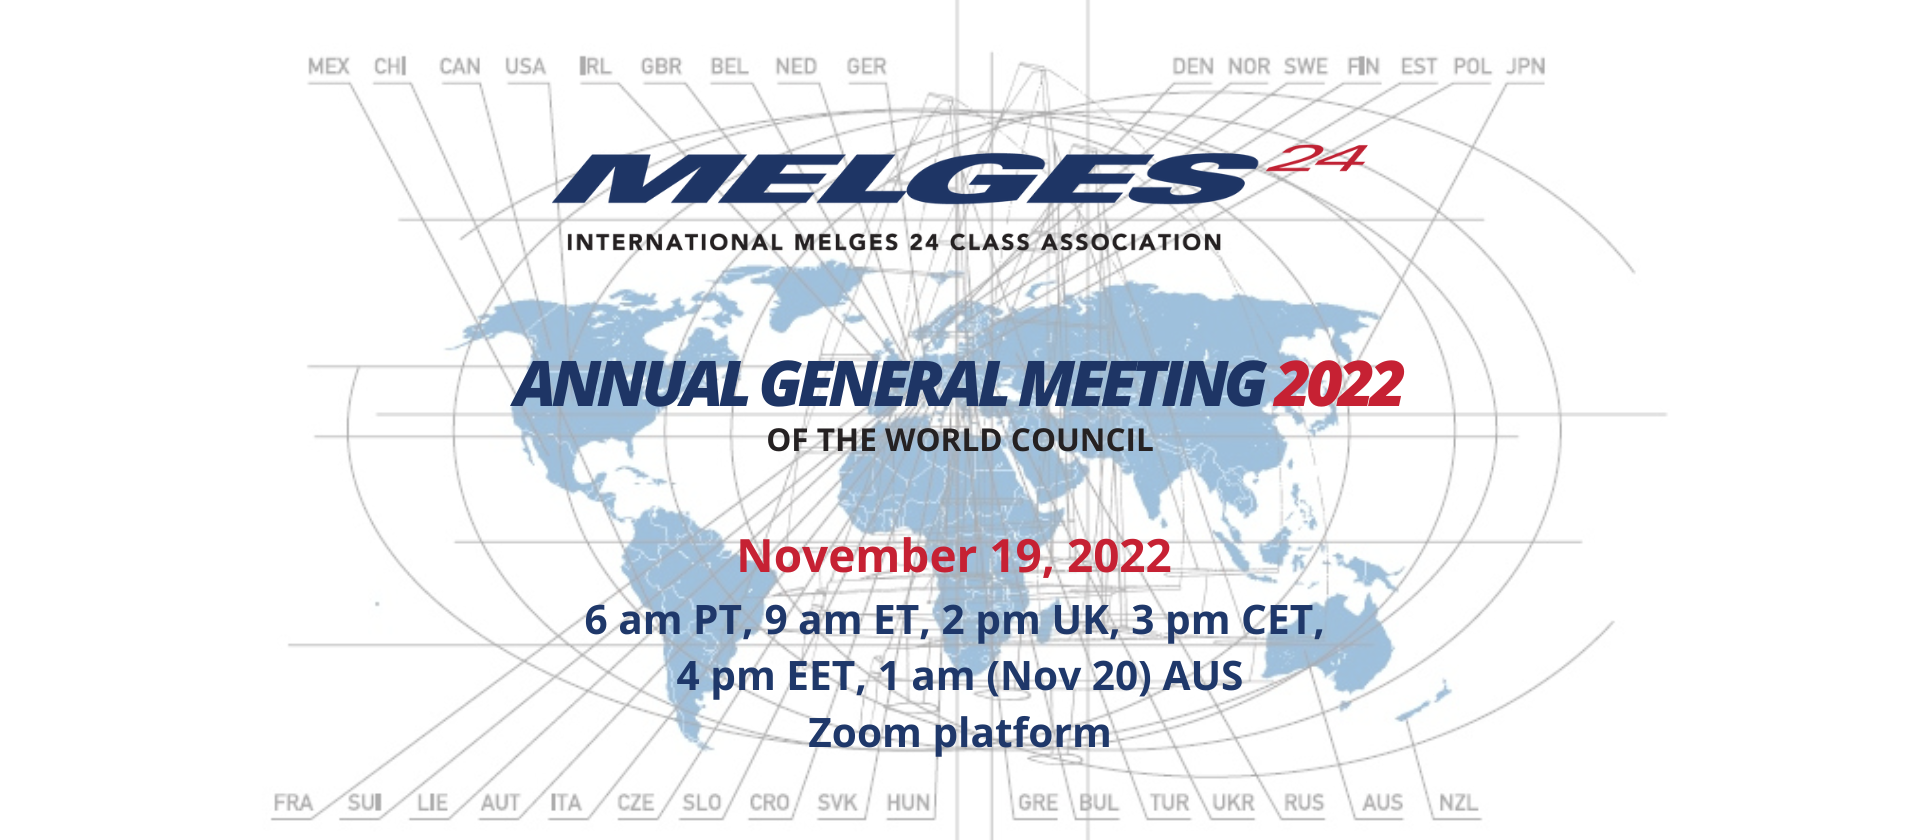 IM24CA Annual General Meeting 2022 of the World Council